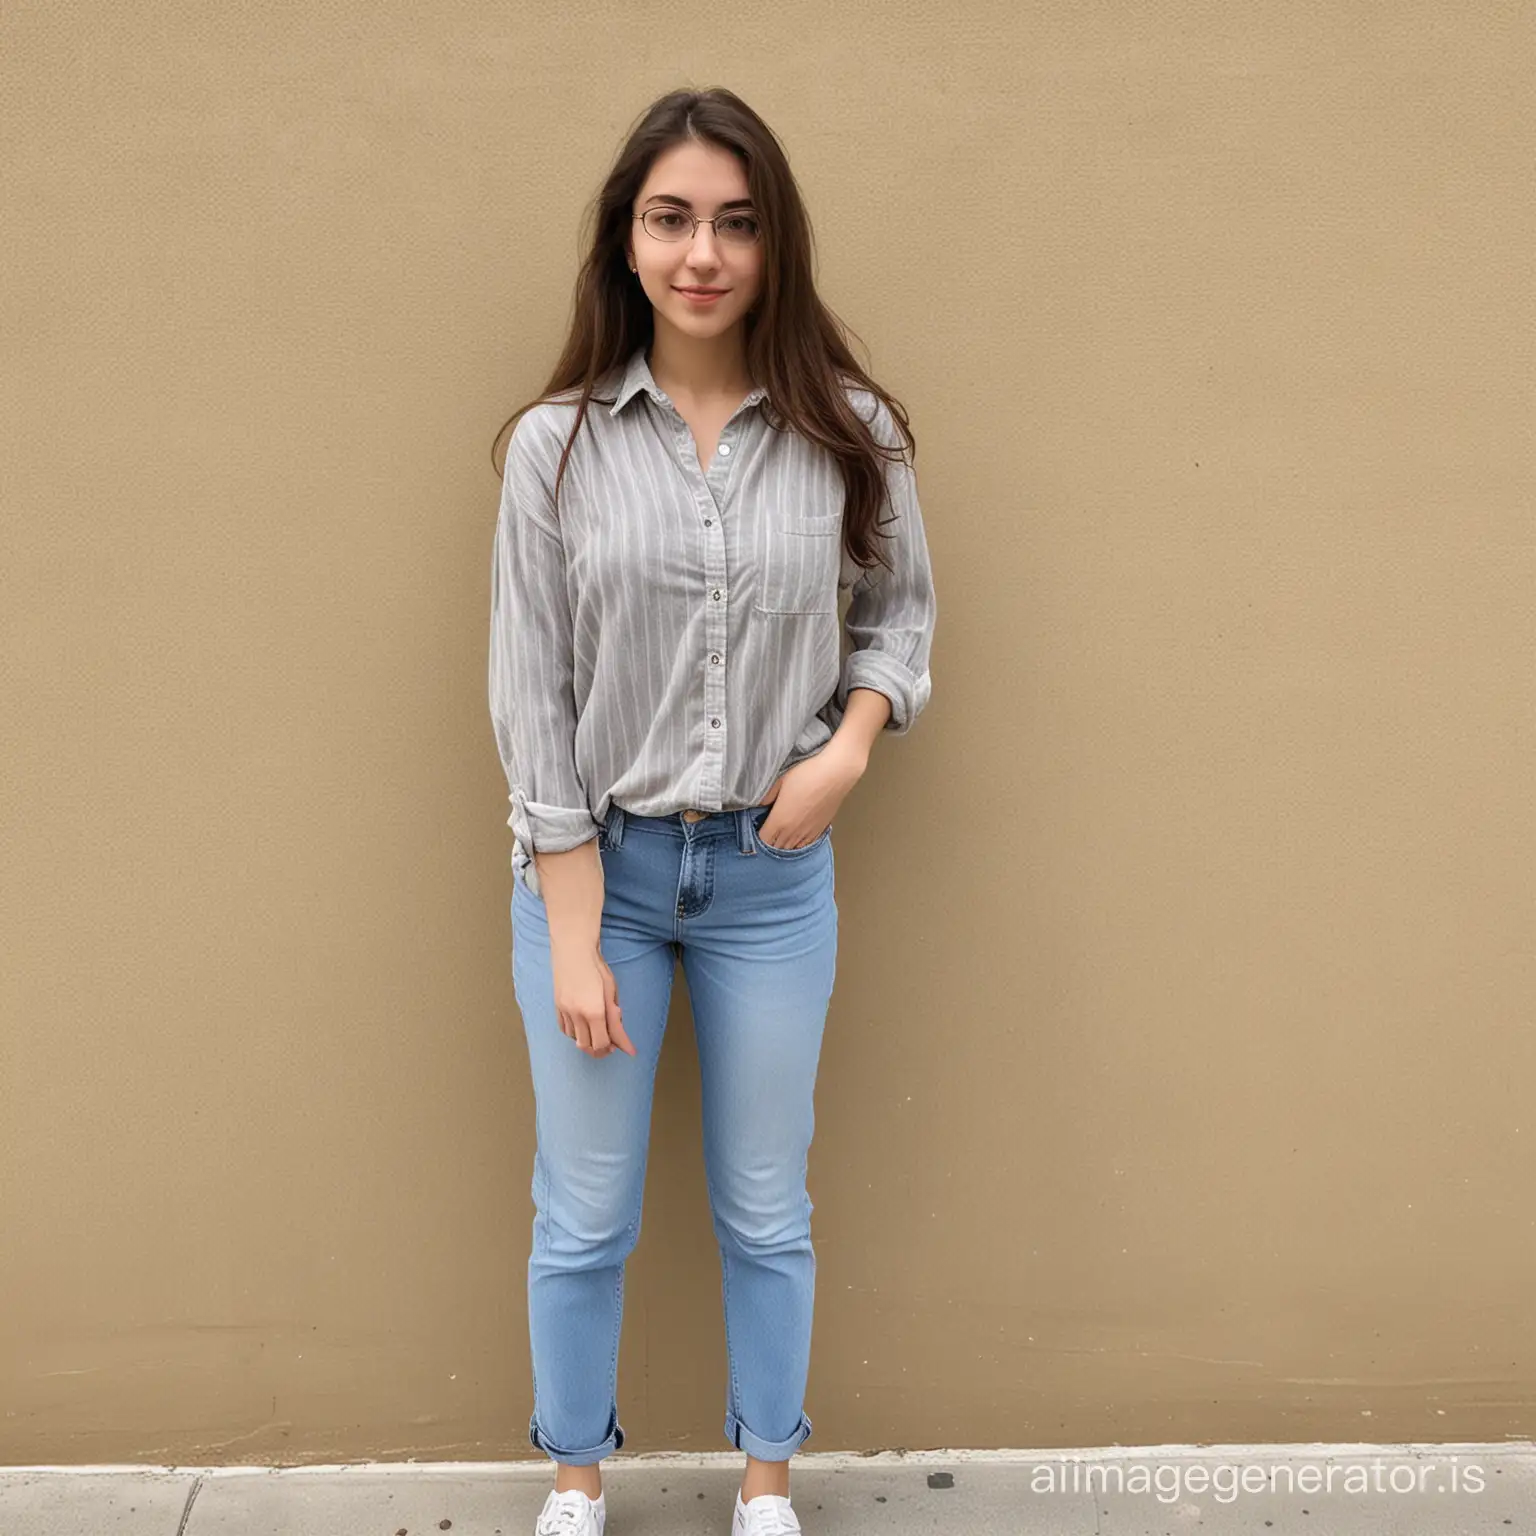 giovane ragazza, college well casual fit 22 years old 